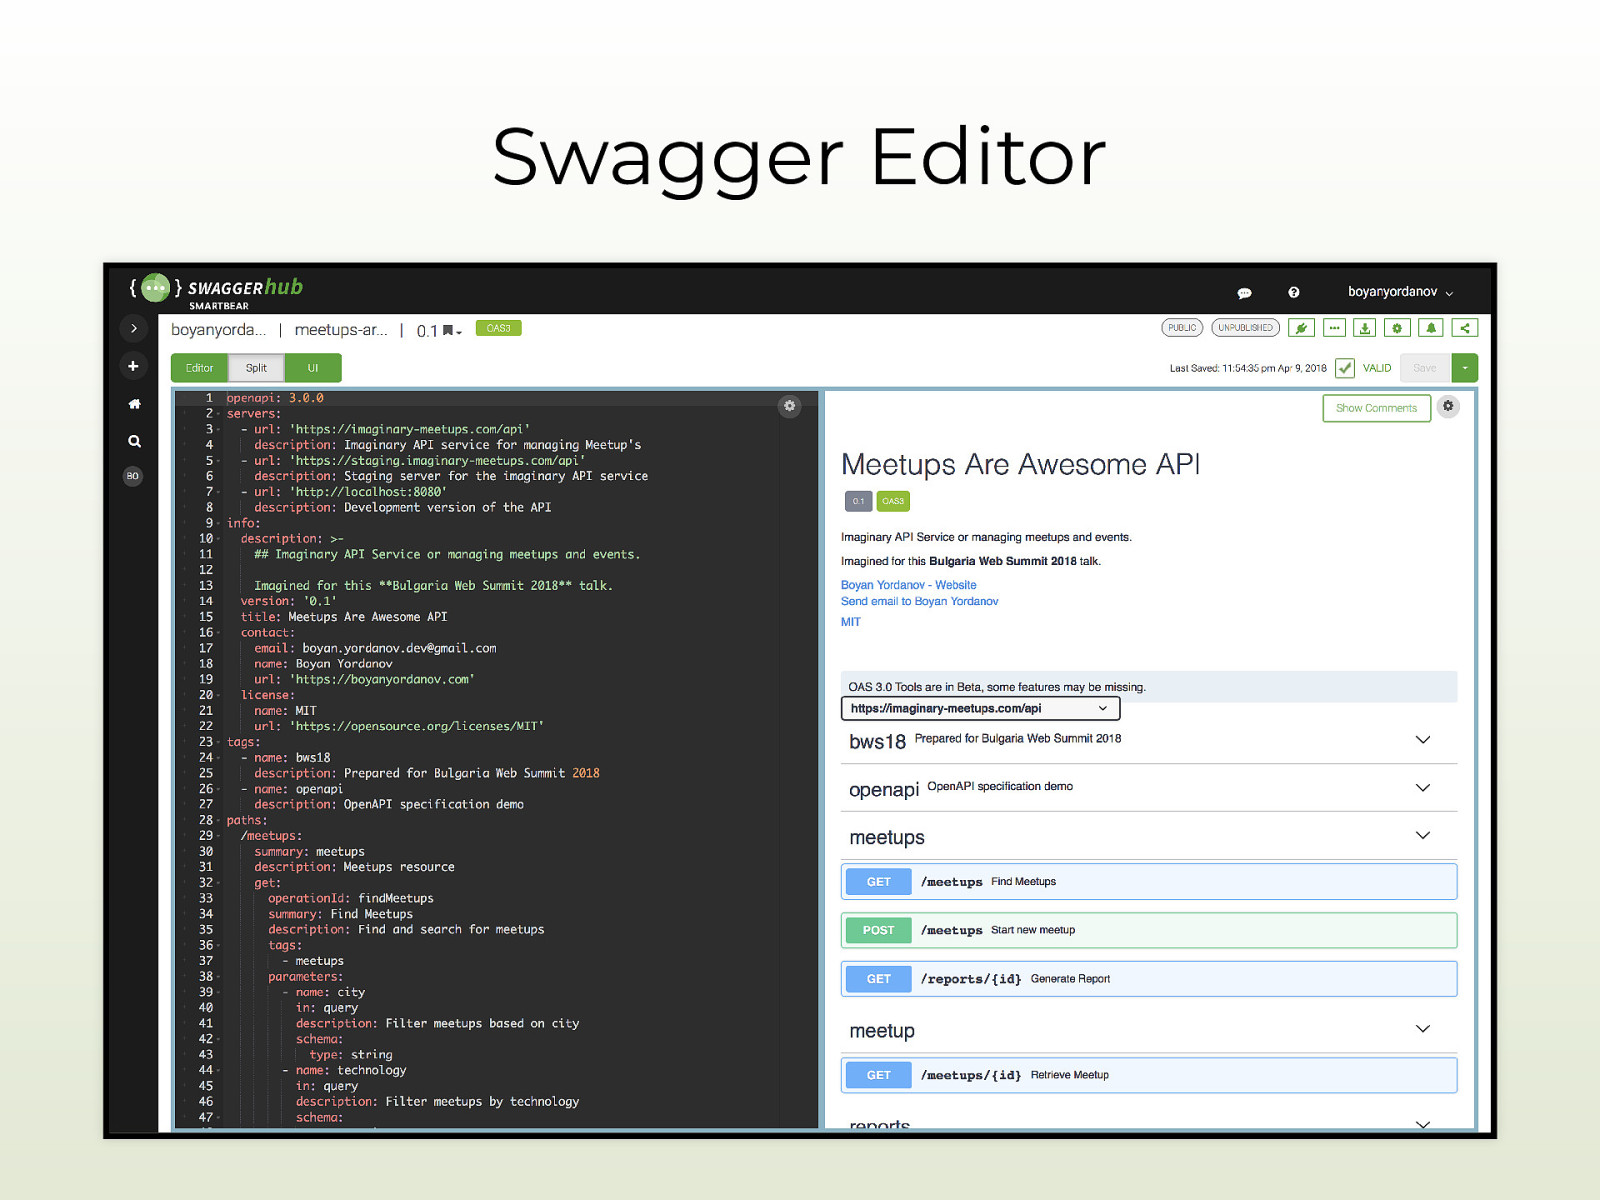 swagger editor https